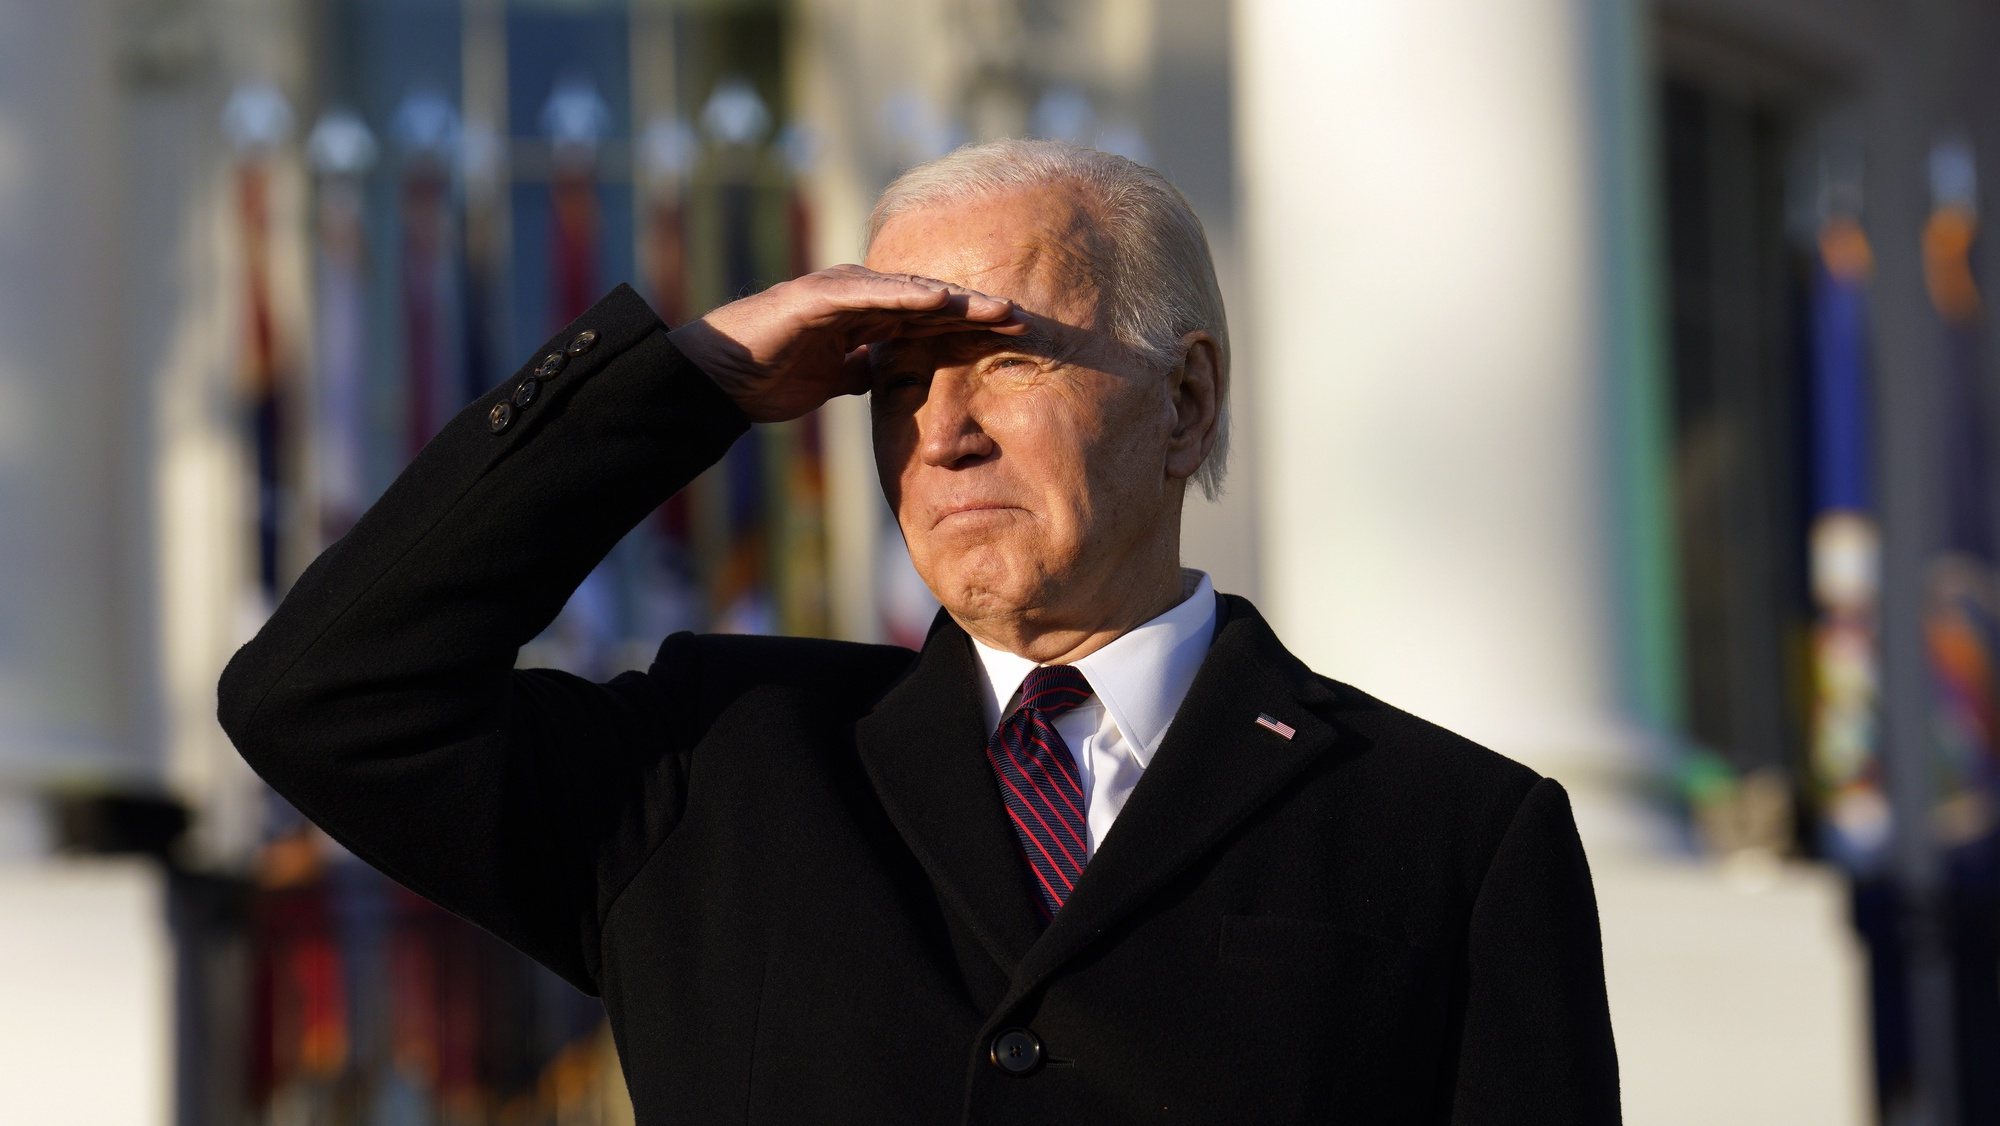 epa10364583 US President Joe Biden shields his eyes during the Respect for Marriage Act cememony on the South Lawn of the White House in Washington, DC, USA, 13 December 2022. The Respect for Marriage Act protects same-sex marriage and interracial marriage.  EPA/YURI GRIPAS / POOL